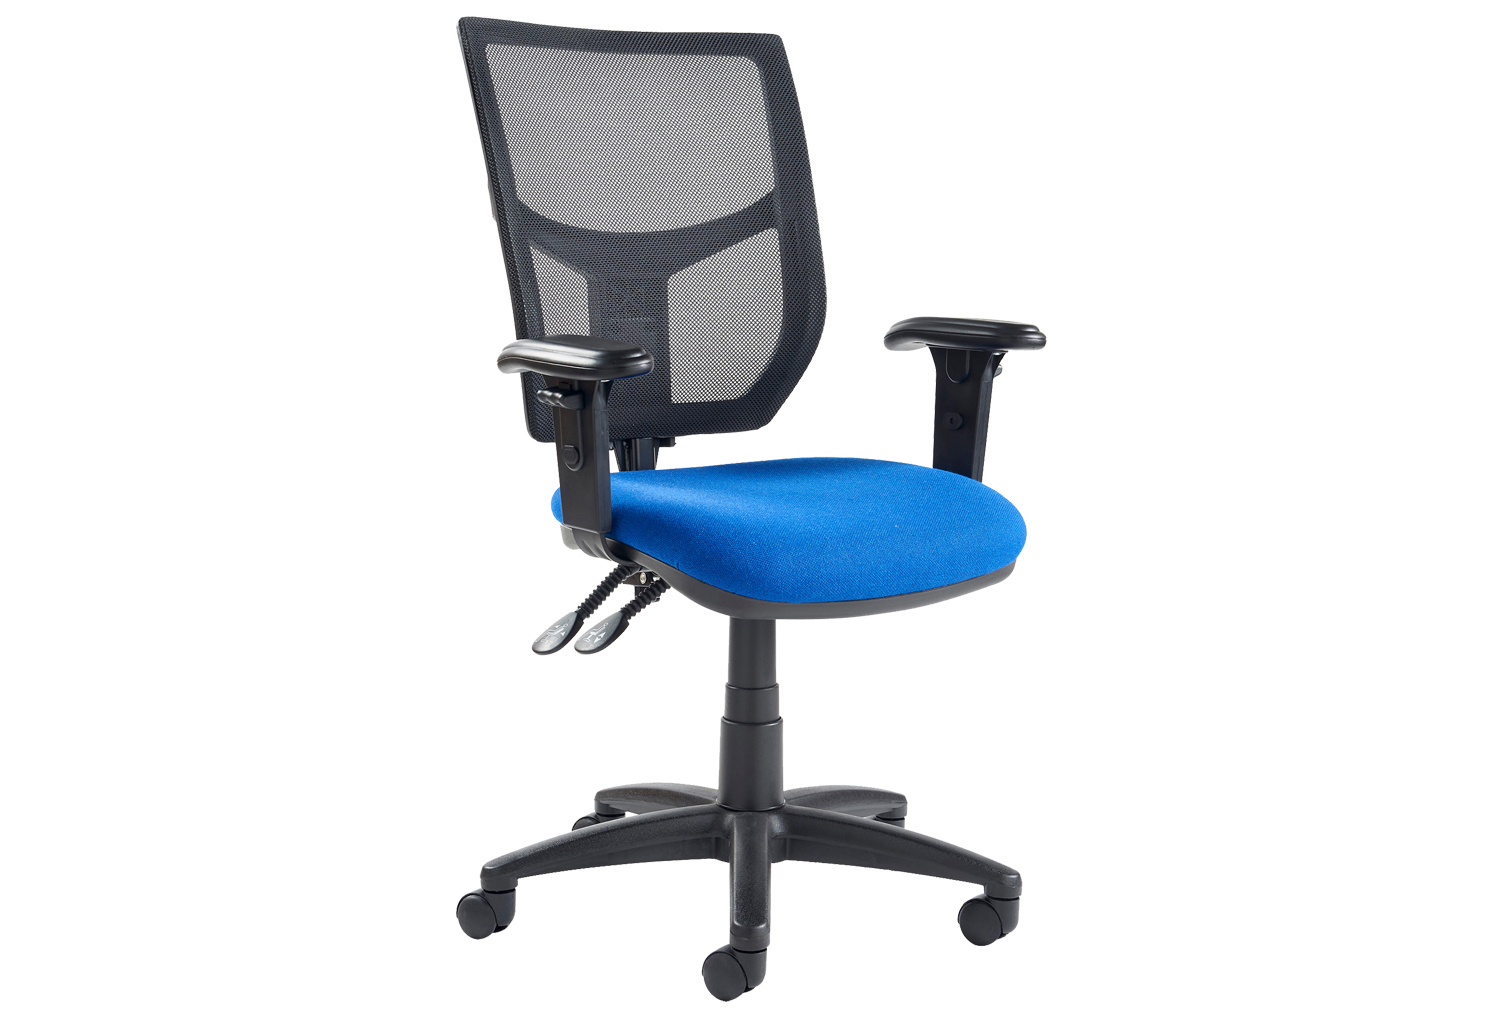 Gordy 3 Lever High Mesh Back Operator Office Chair With Adjustable Arms, Havana